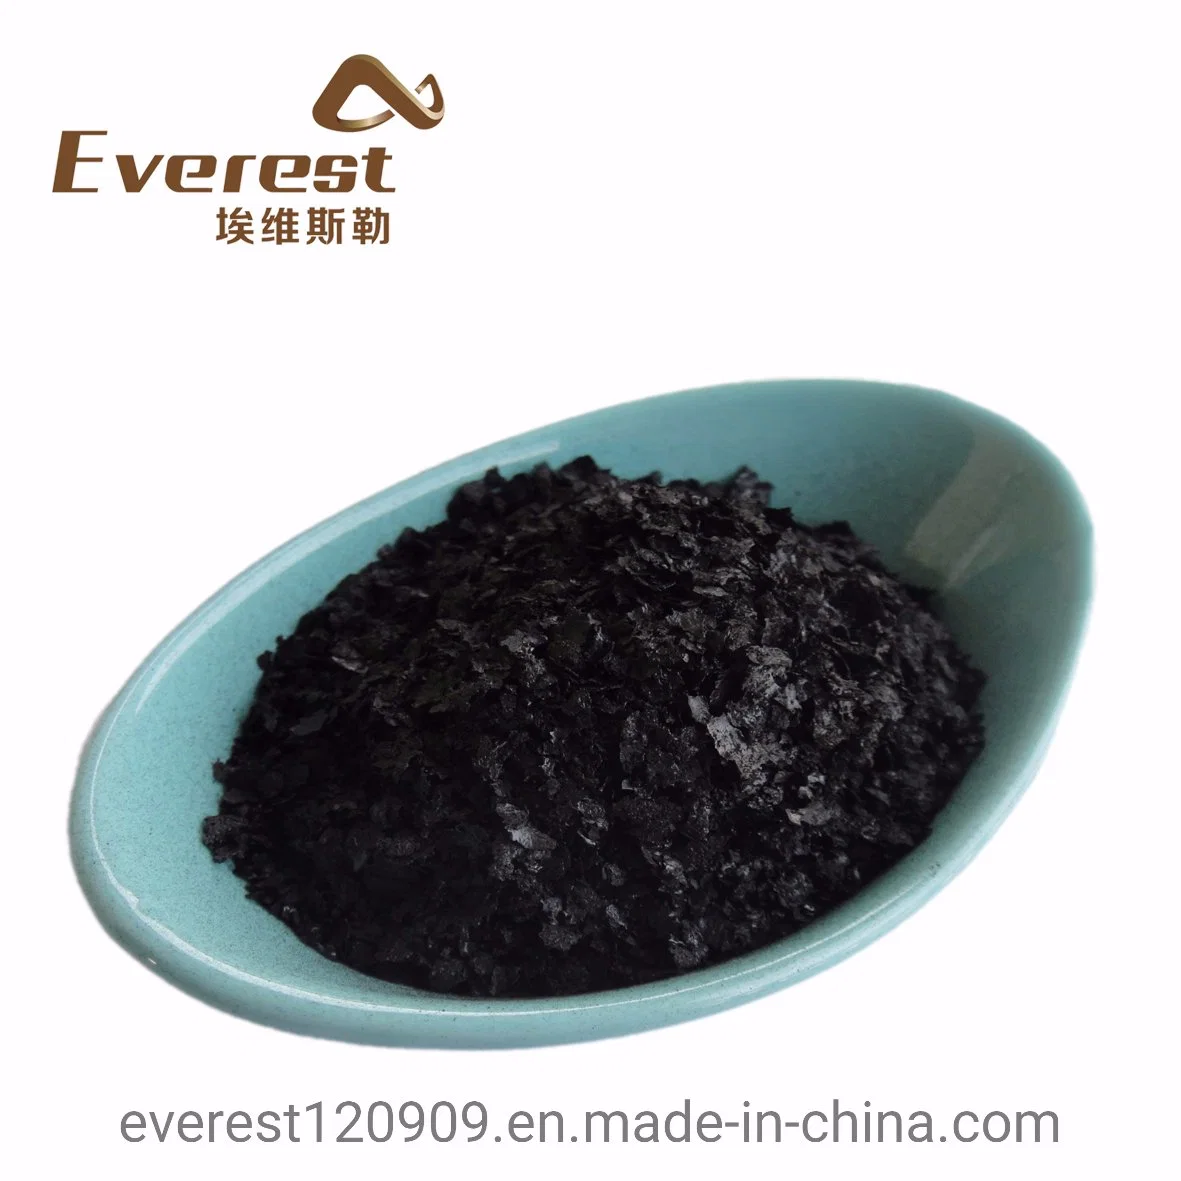 Natural Seaweed Extract Powder Containing 7% Mannitol